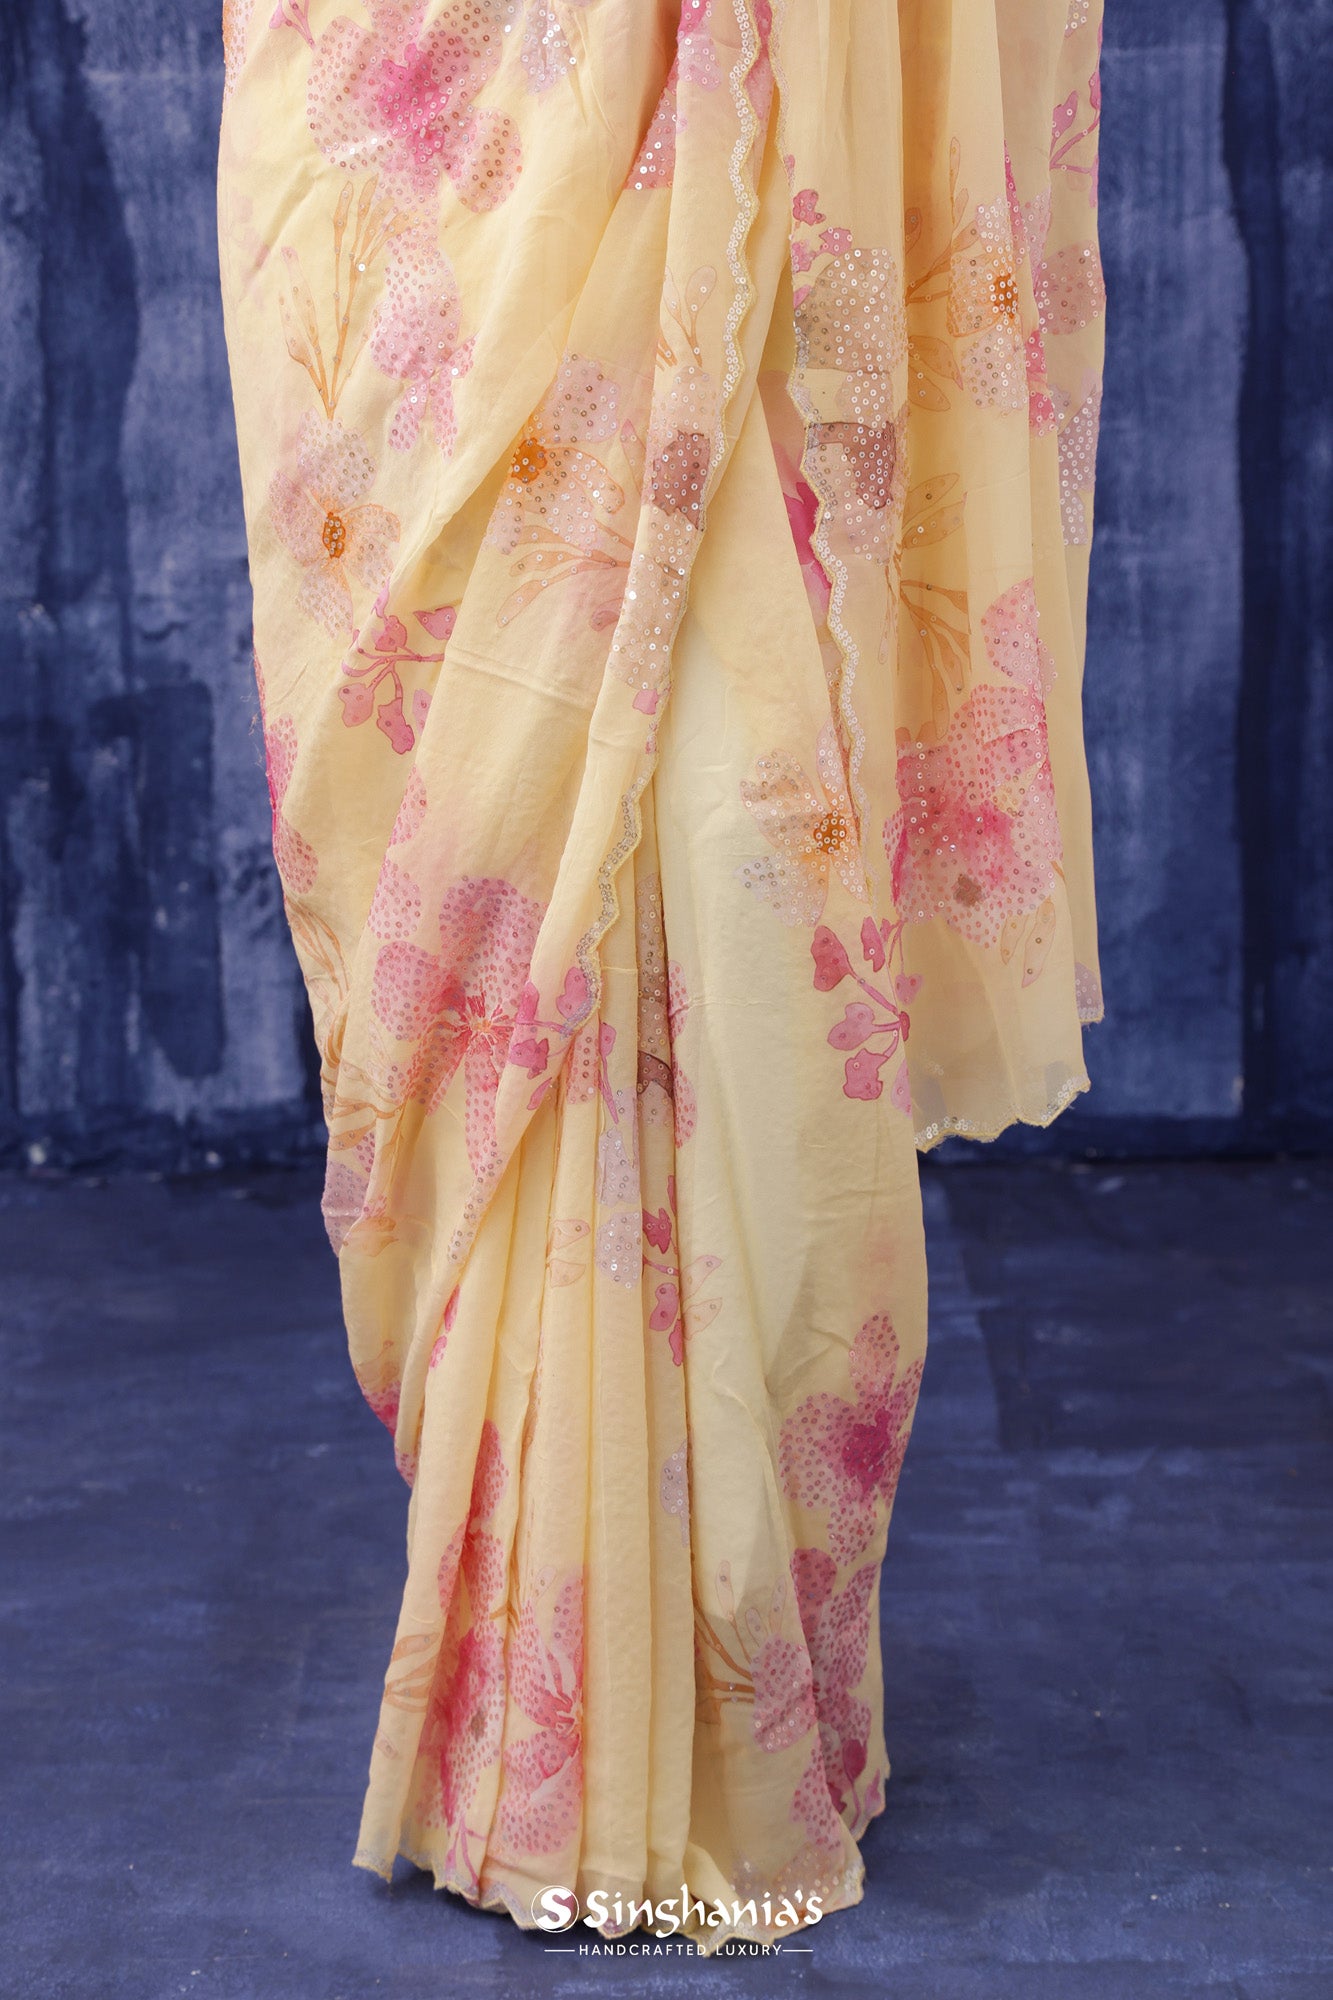 Light Saffron Yellow Printed Georgette Saree With Hand Embroidery